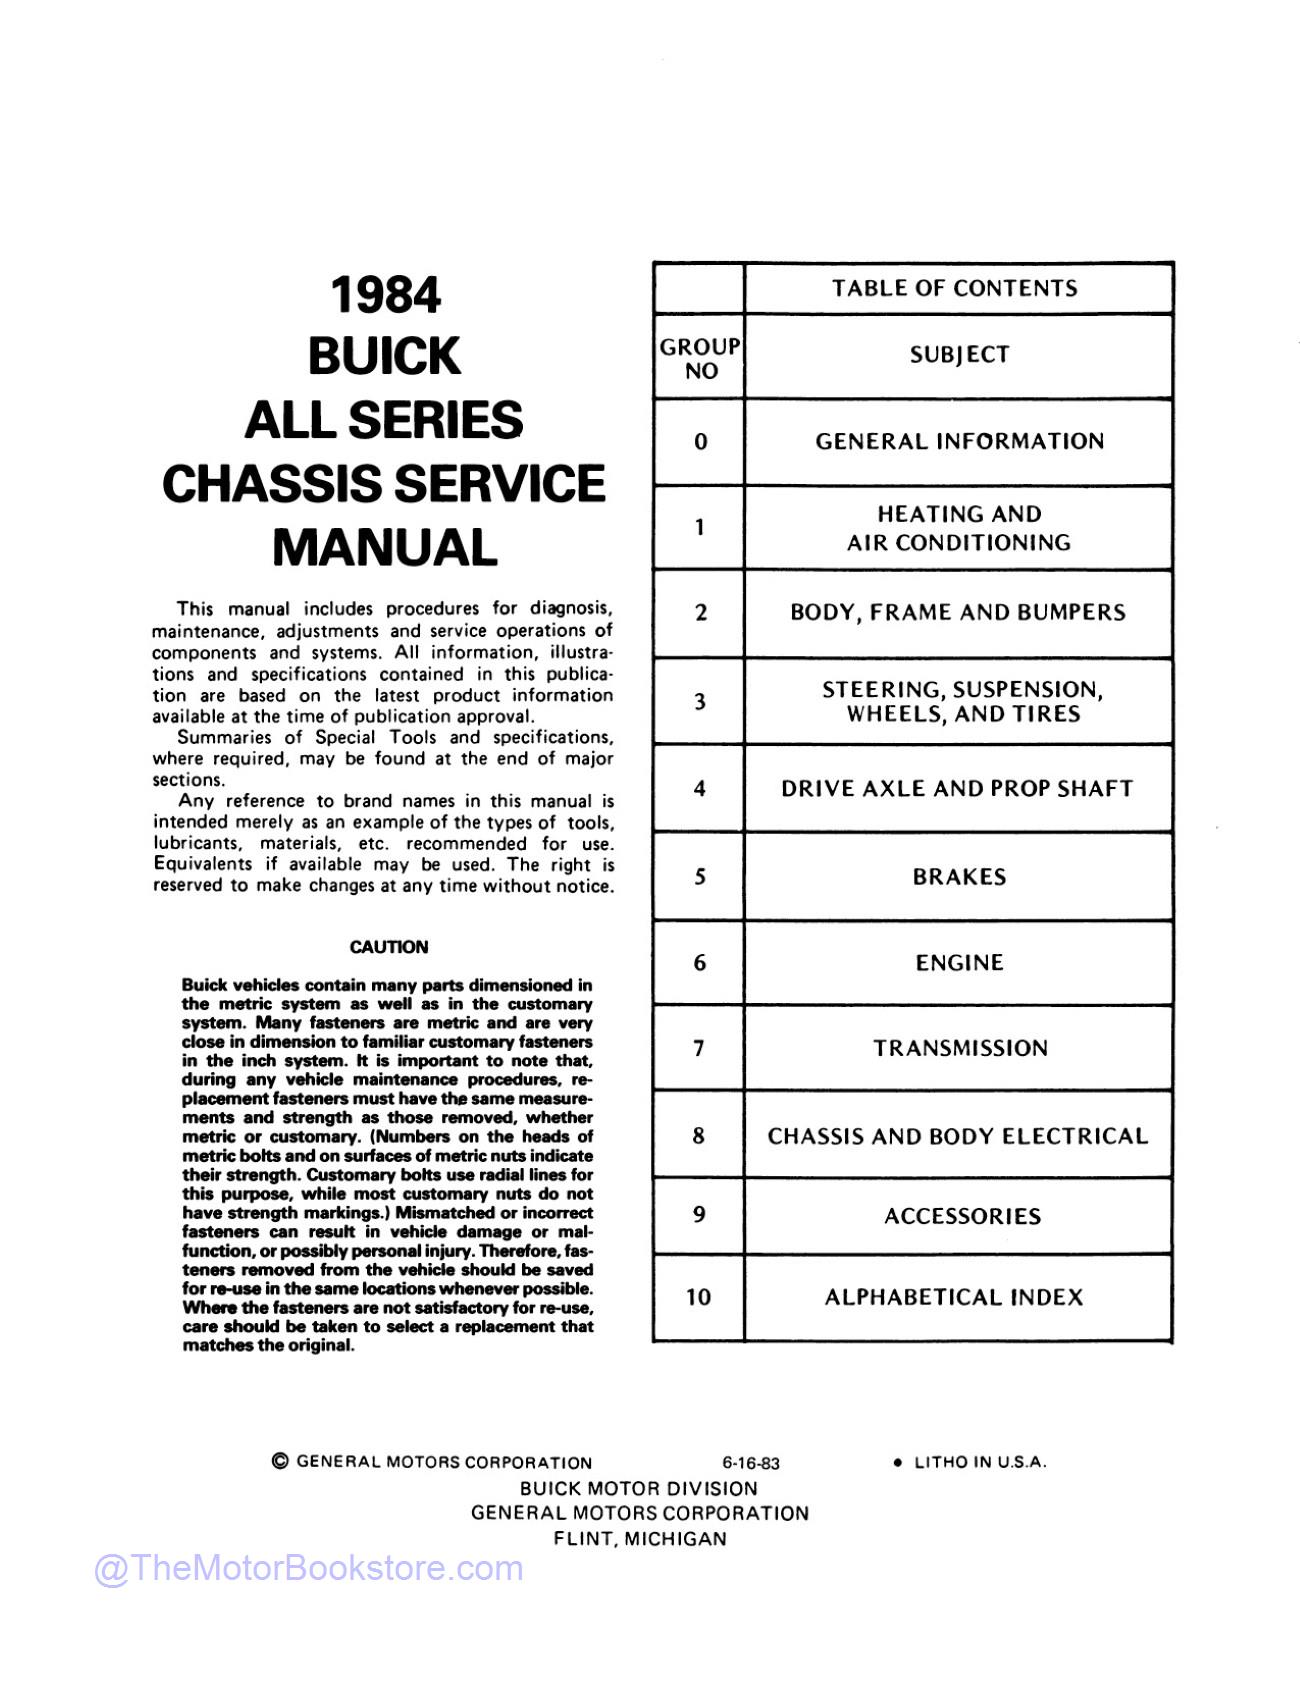 1984 Buick and Grand National Service Manual   - Table of Contents